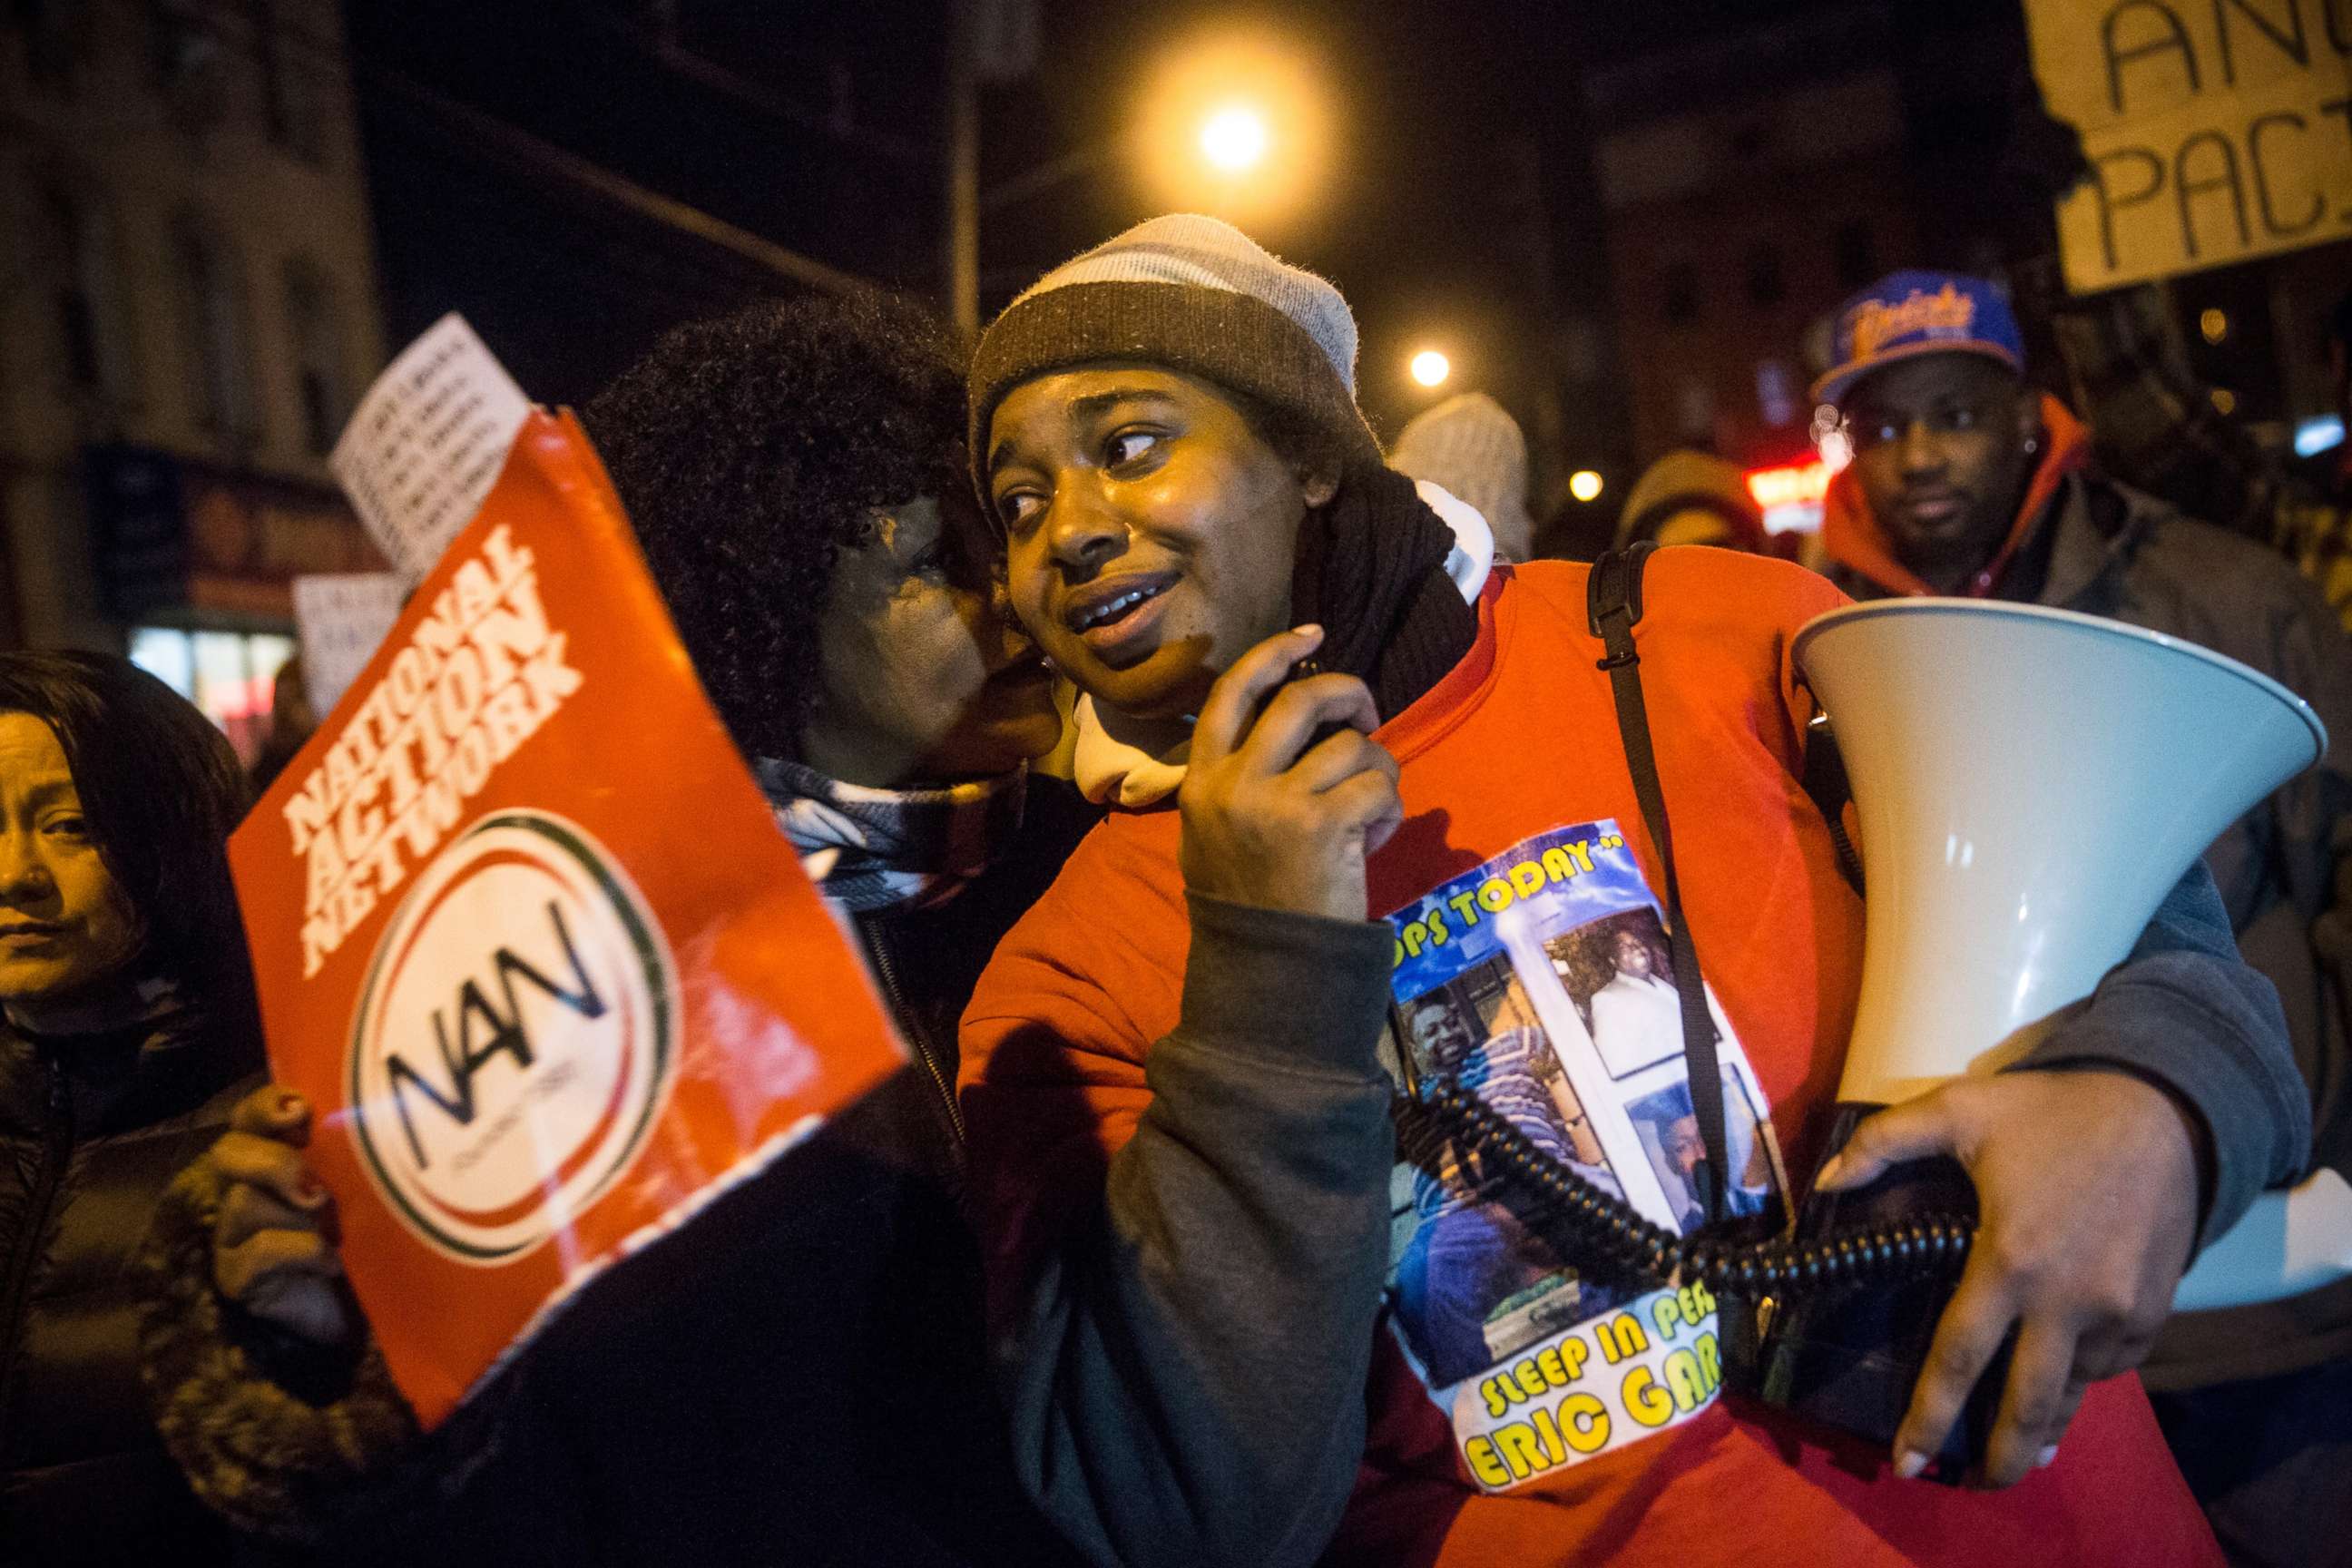 PHOTO: Erica Garner leads a march of people protesting the Staten Island, New York grand jury's decision not to indict a police officer involved in the choke-hold death of her father Eric Garner in July, on Dec. 11, 2014.